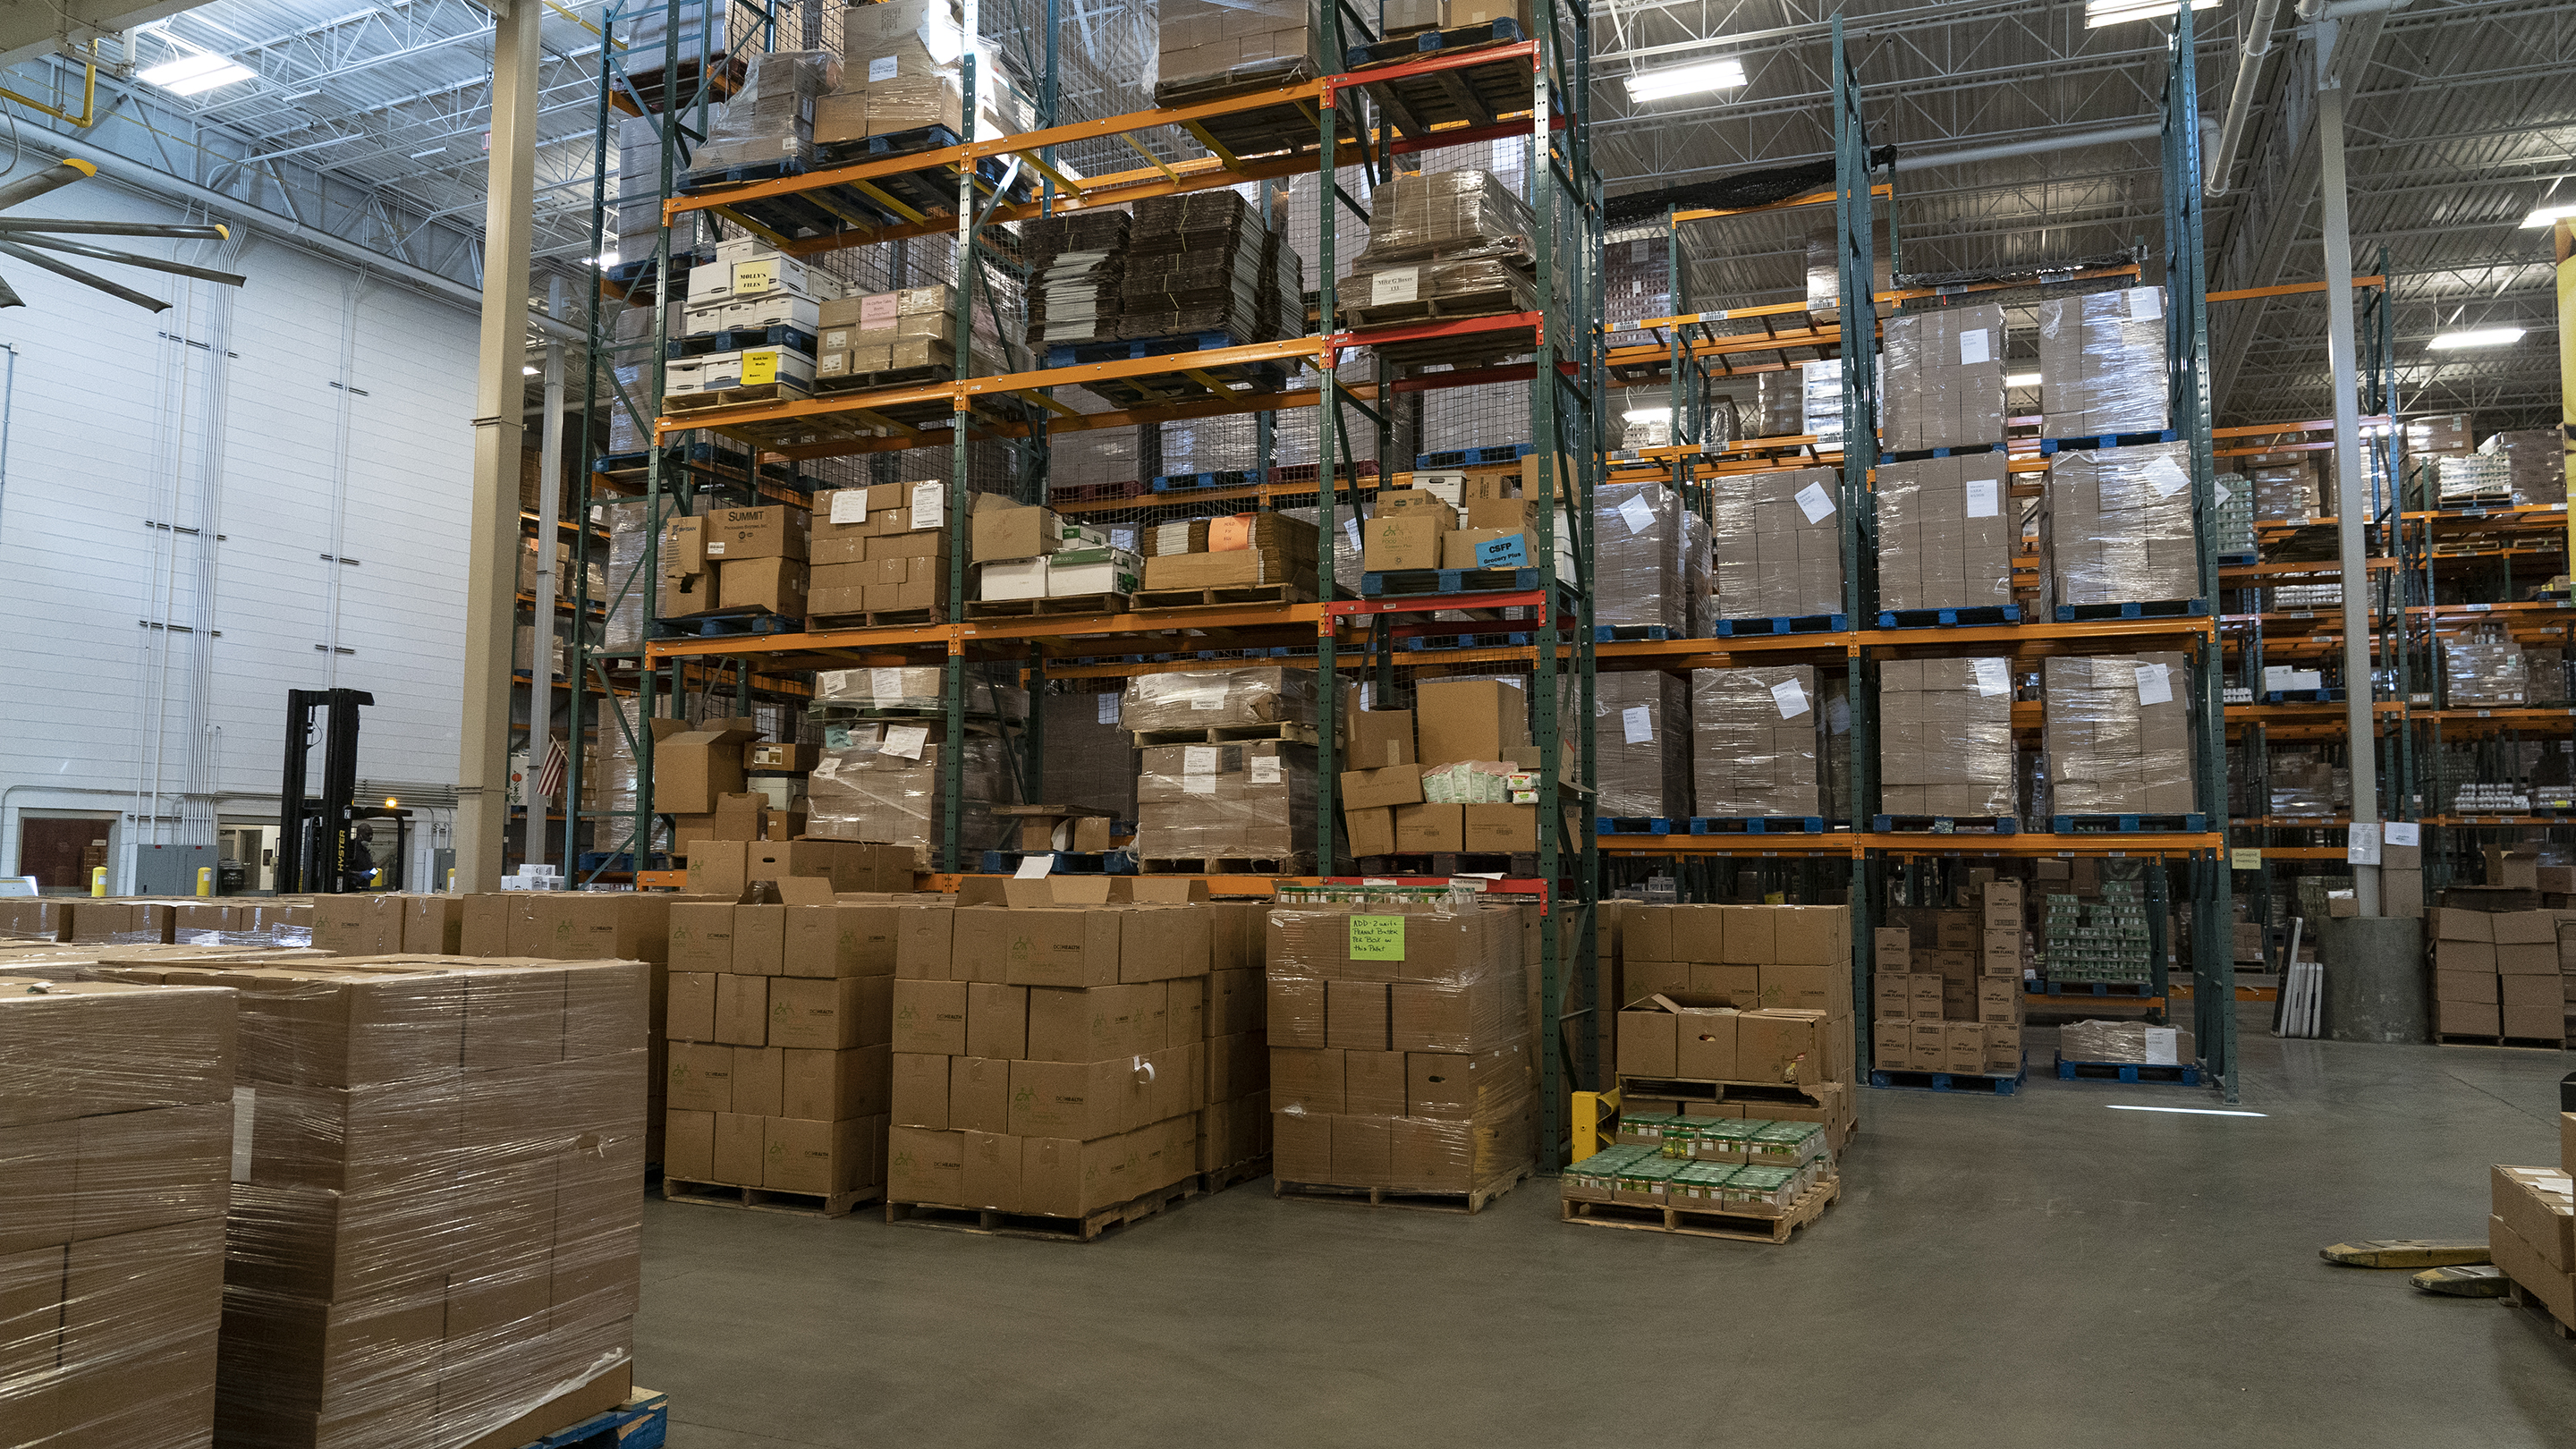 Warehouse space is in demand - Marketplace